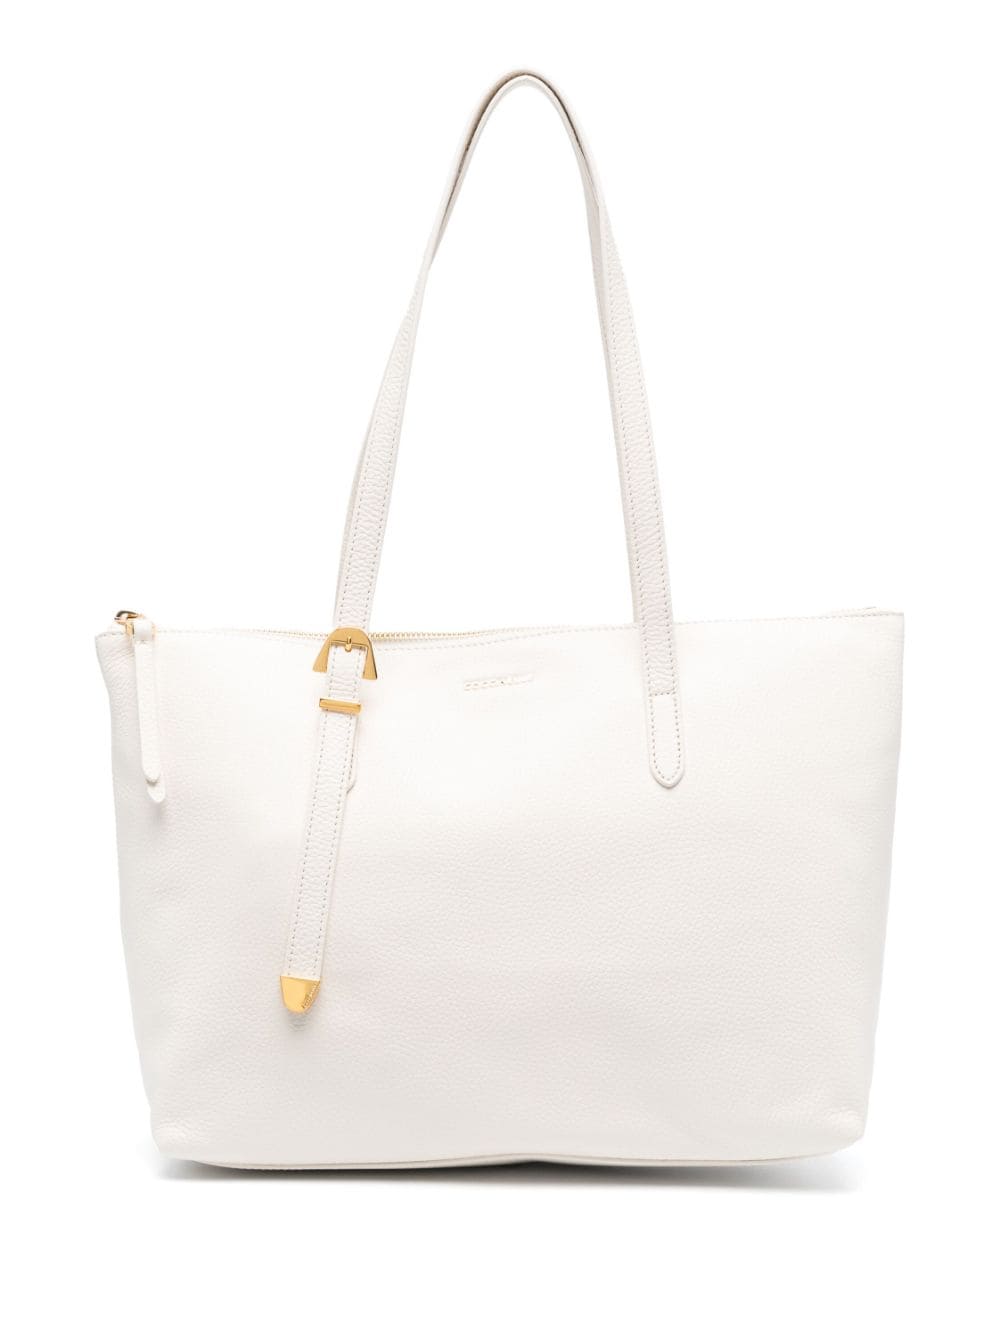 Coccinelle Gleen long-handle tote bag - White von Coccinelle